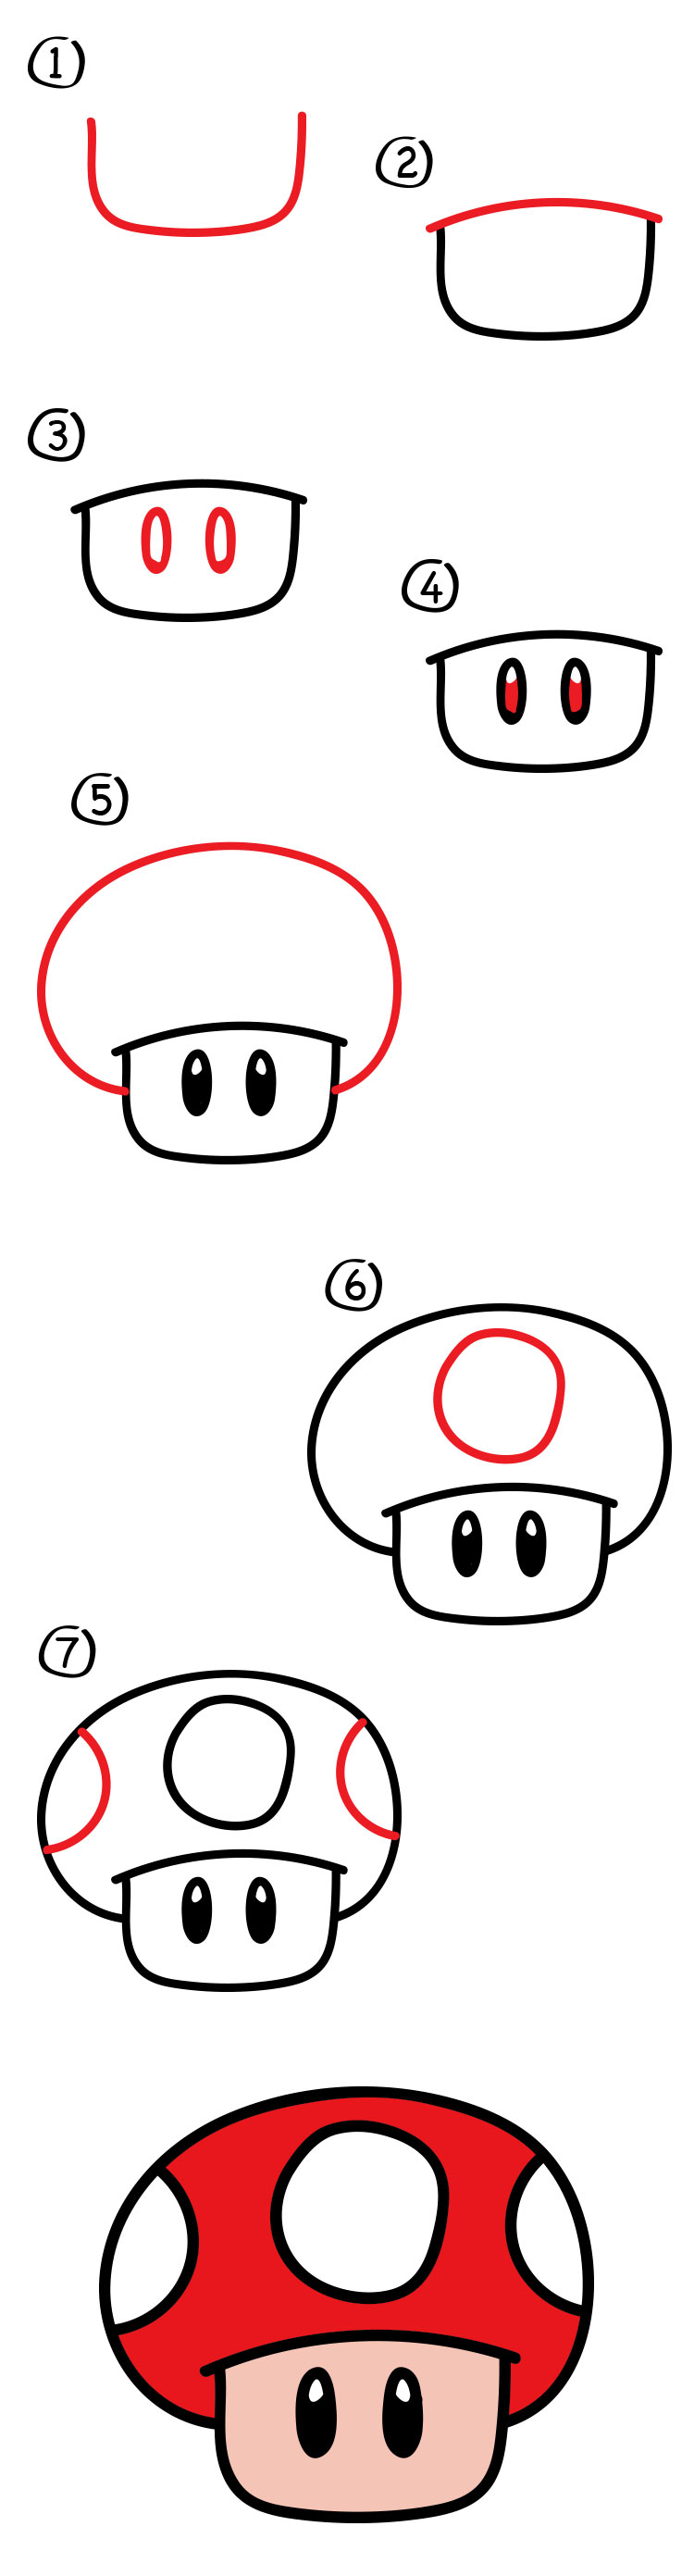 How To Draw A Mario Mushroom Art For Kids Hub Easy drawings for kids funny and easy drawing videos for kids learn. how to draw a mario mushroom art for